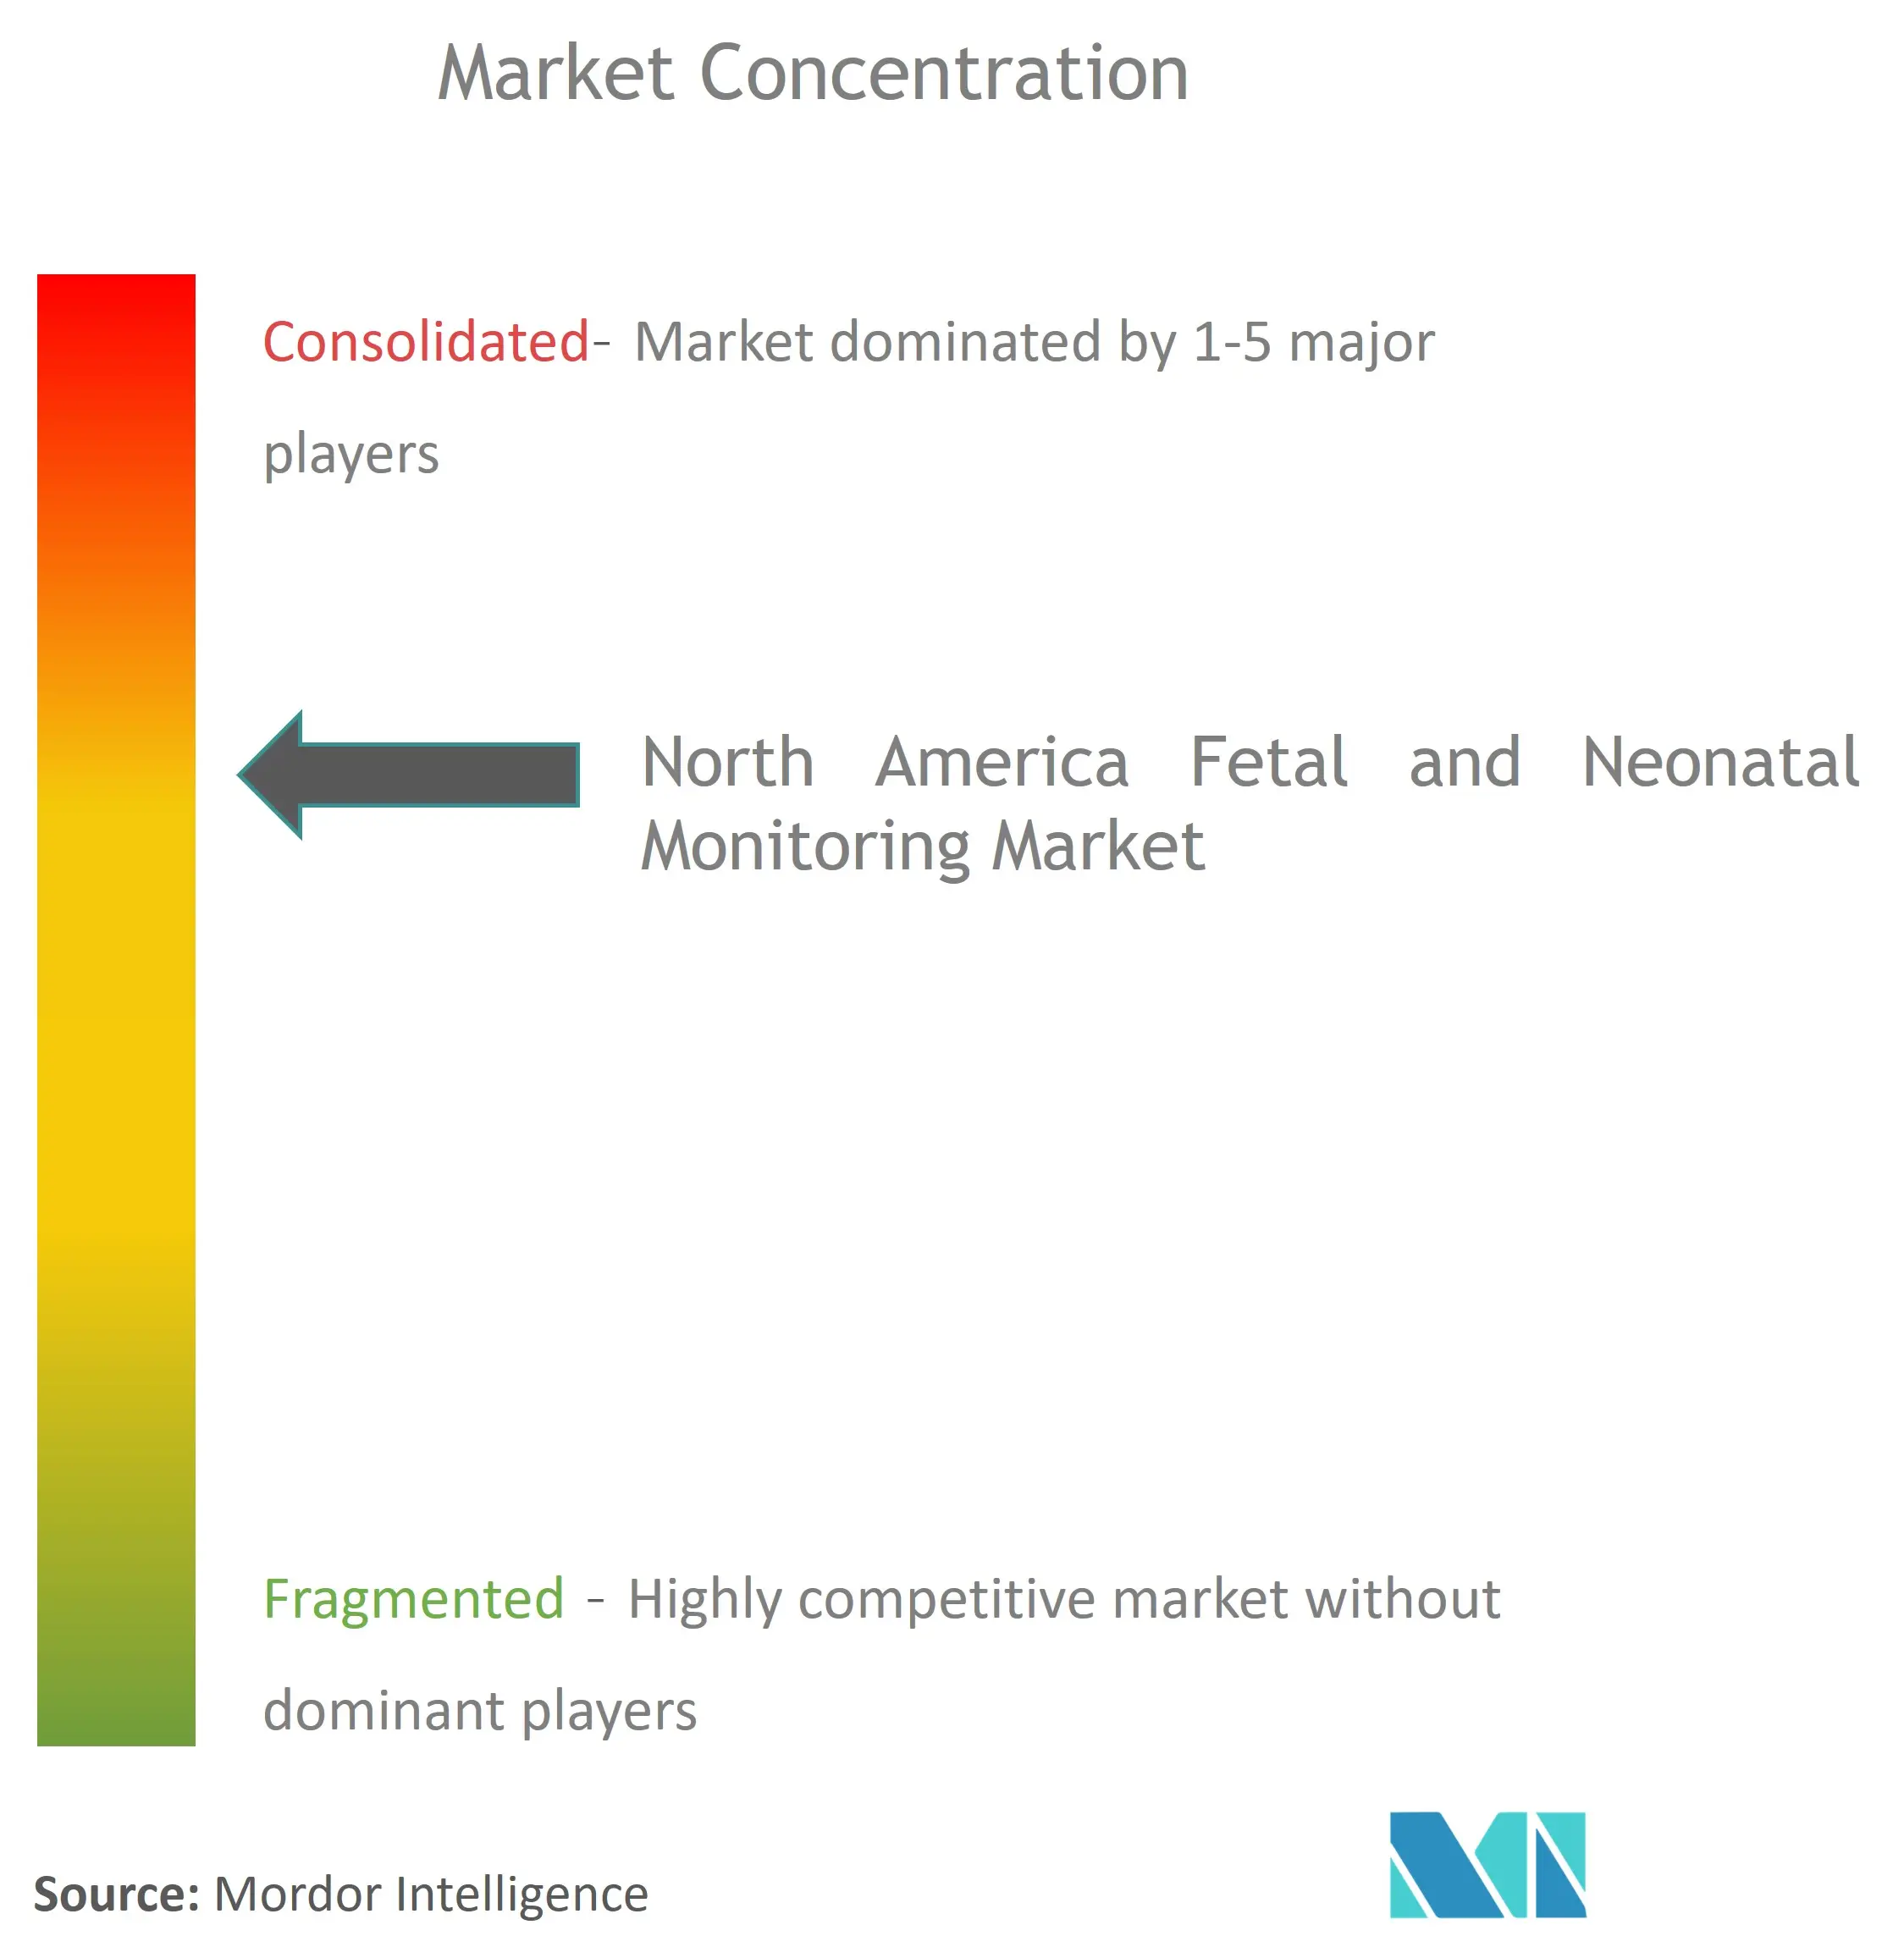 North America Fetal and Neonatal Monitoring Market Concentration